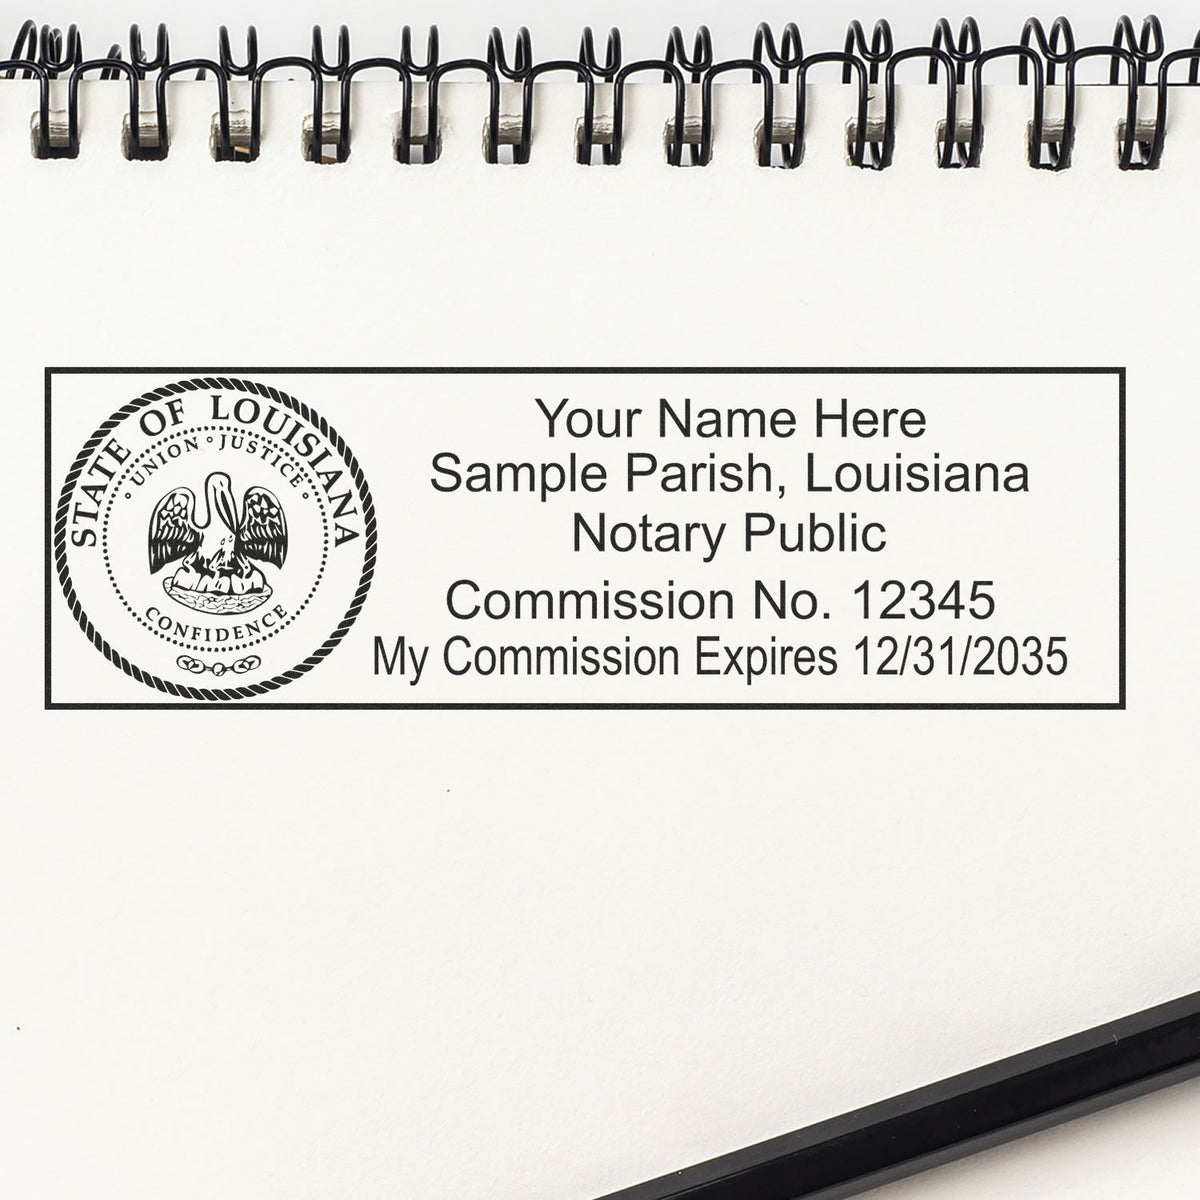 This paper is stamped with a sample imprint of the Super Slim Louisiana Notary Public Stamp, signifying its quality and reliability.